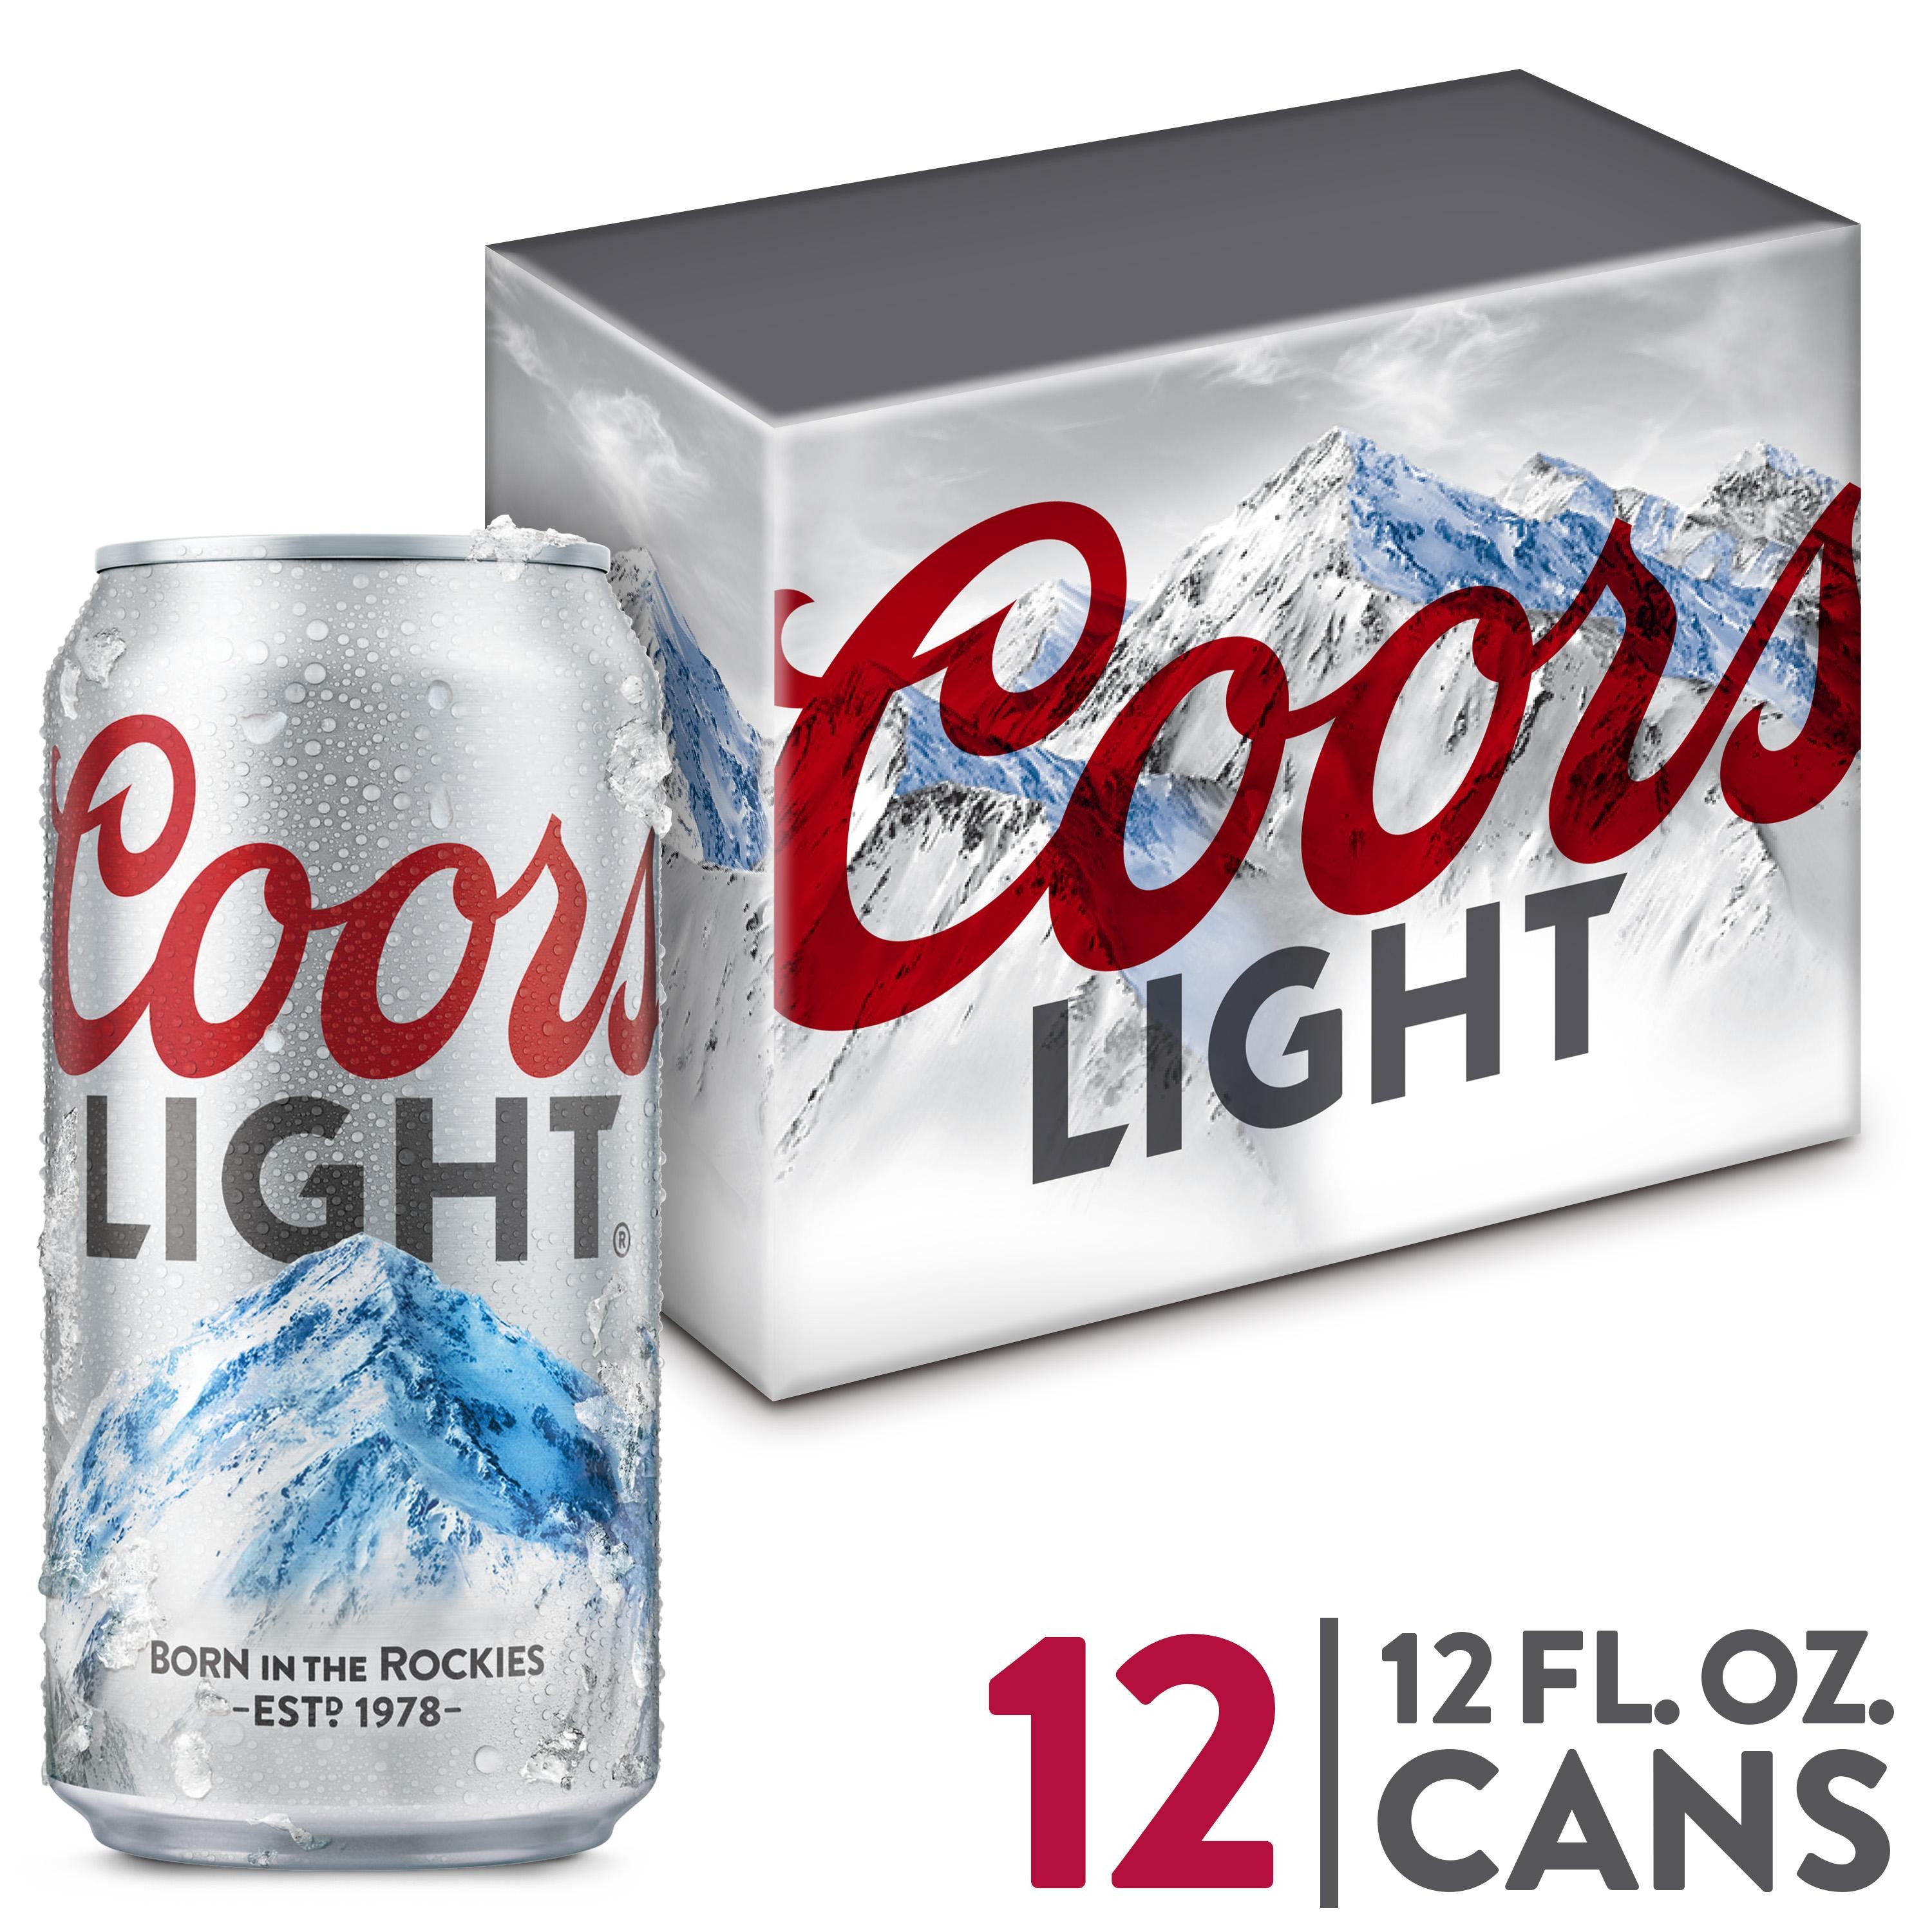 Coors Light American Lager Beer - 12 Pack can